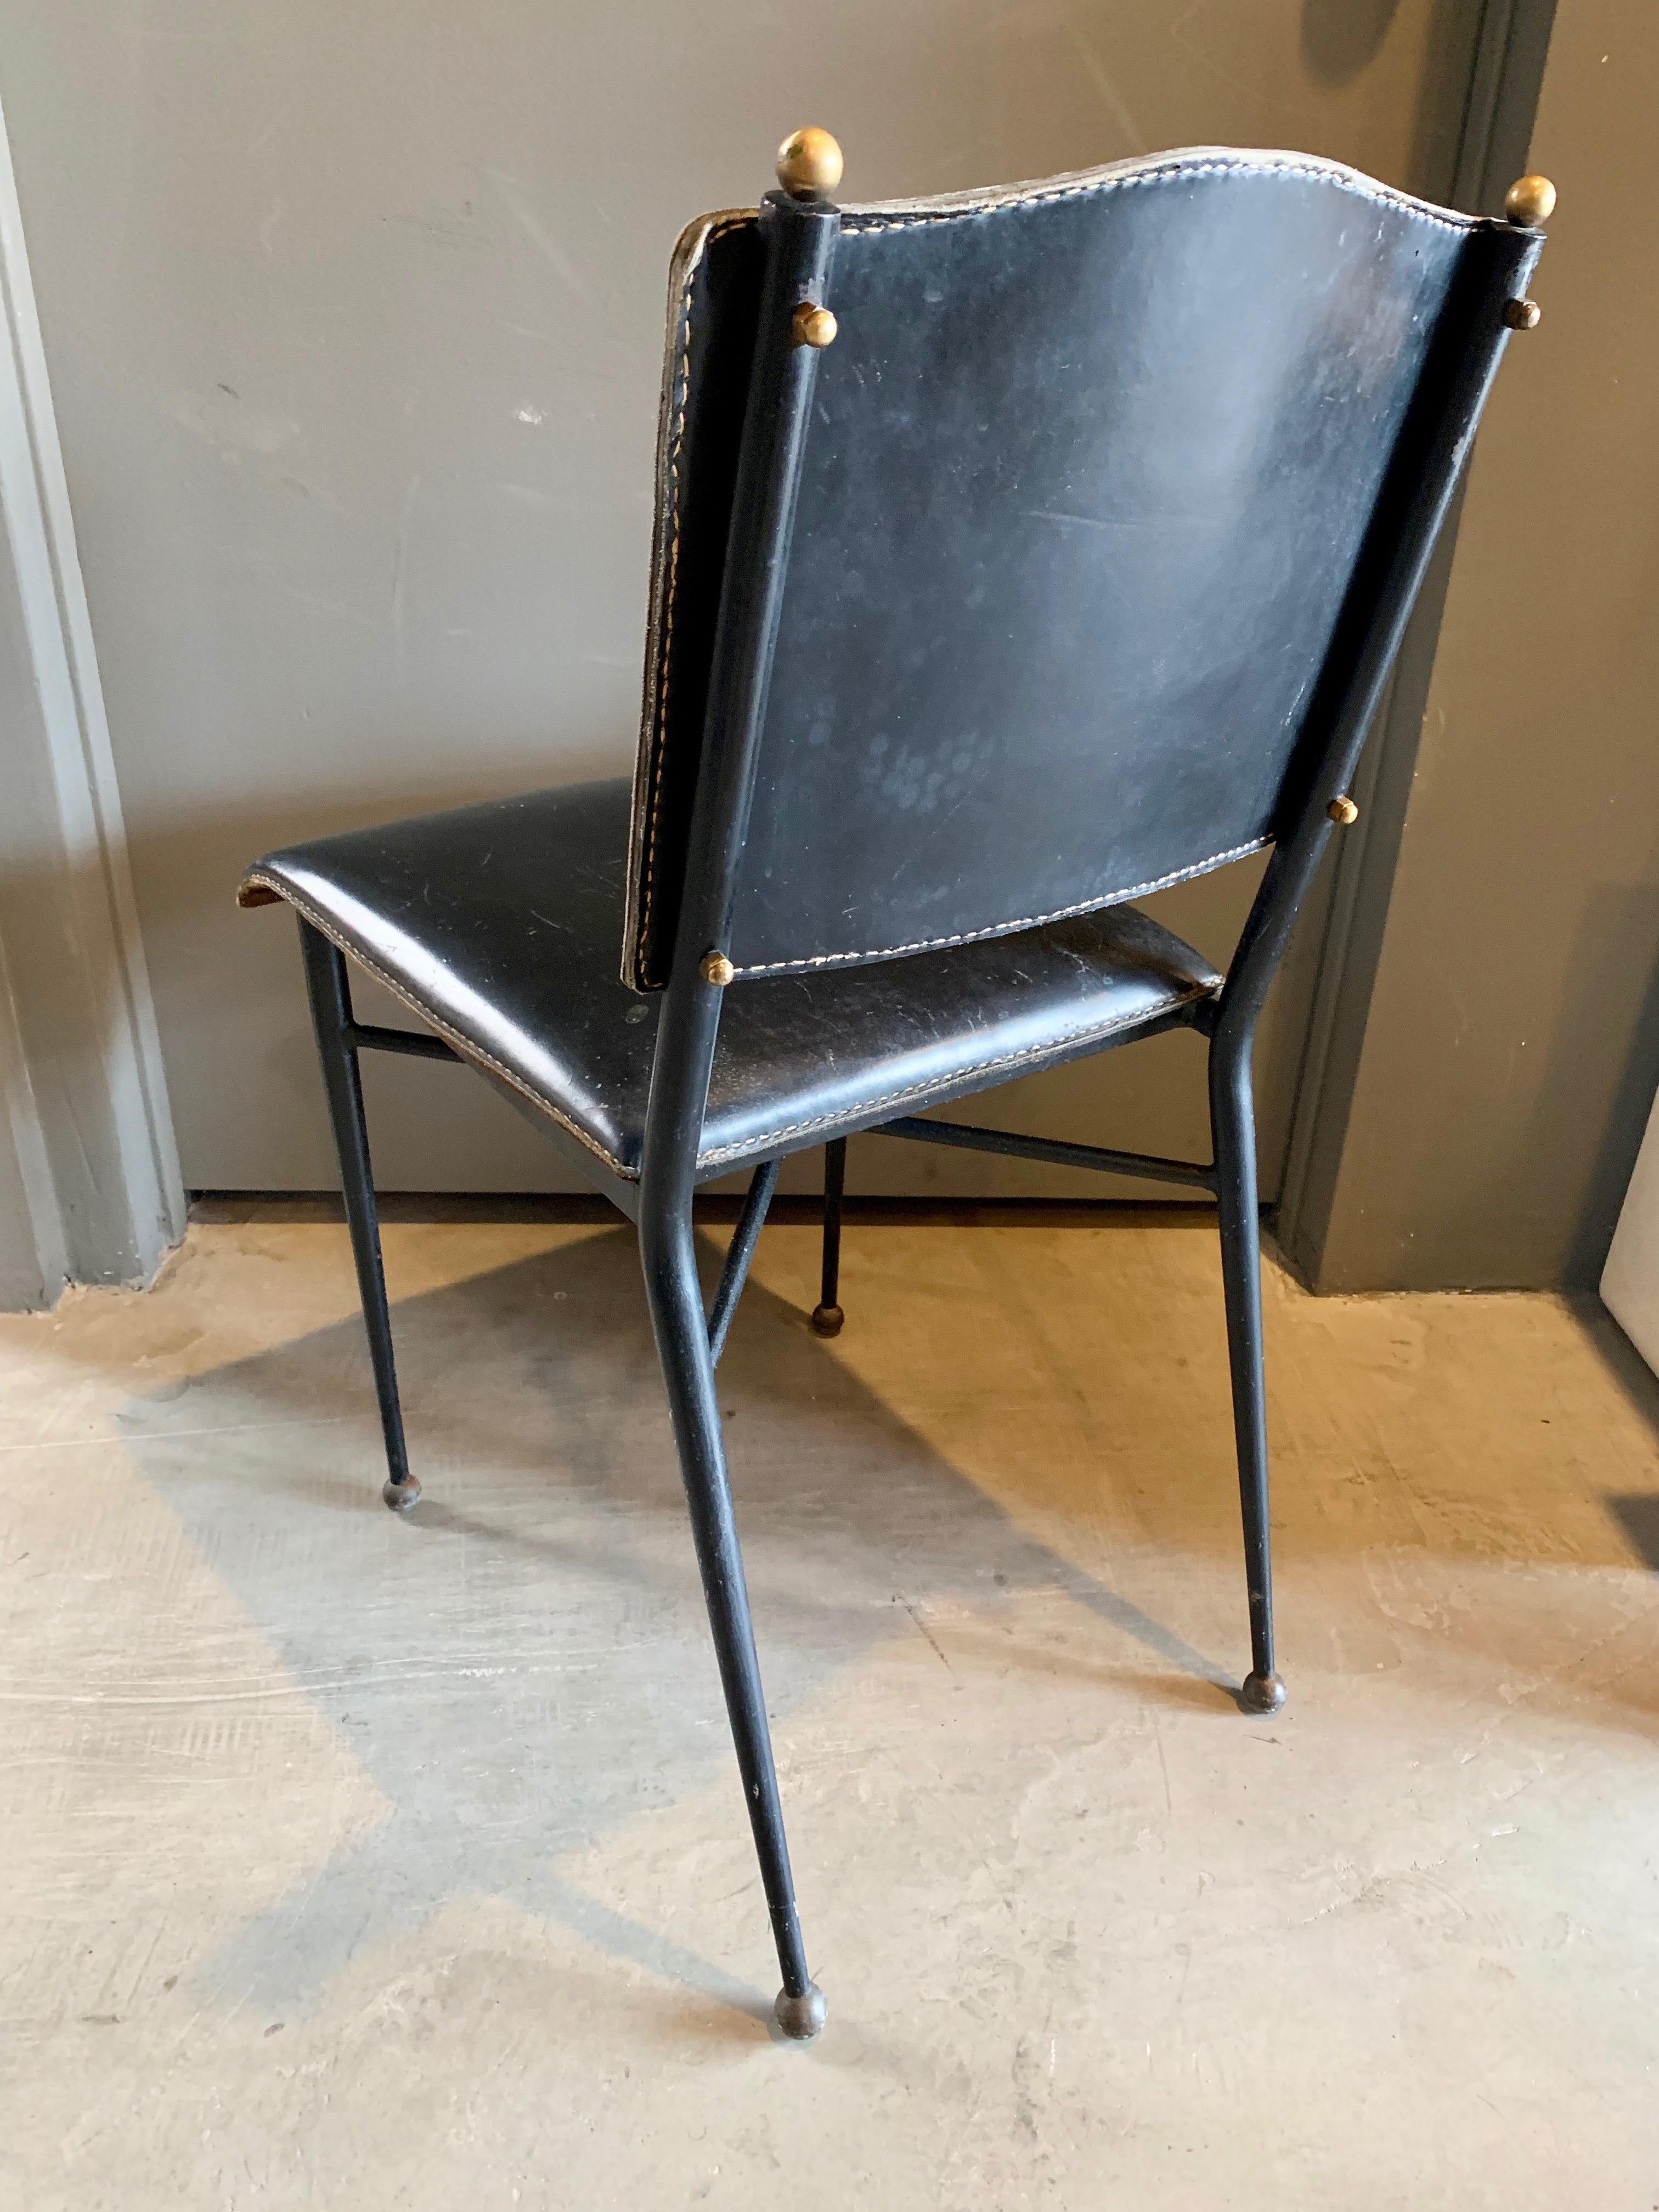 Stunning chair French designer Jacques Adnet. Iron frame with black leather seat and seat back. In good original condition. Signature Adnet contrast stitching. Gorgeous standalone chair.


Over 75 pieces of Jacques Adnet in our other